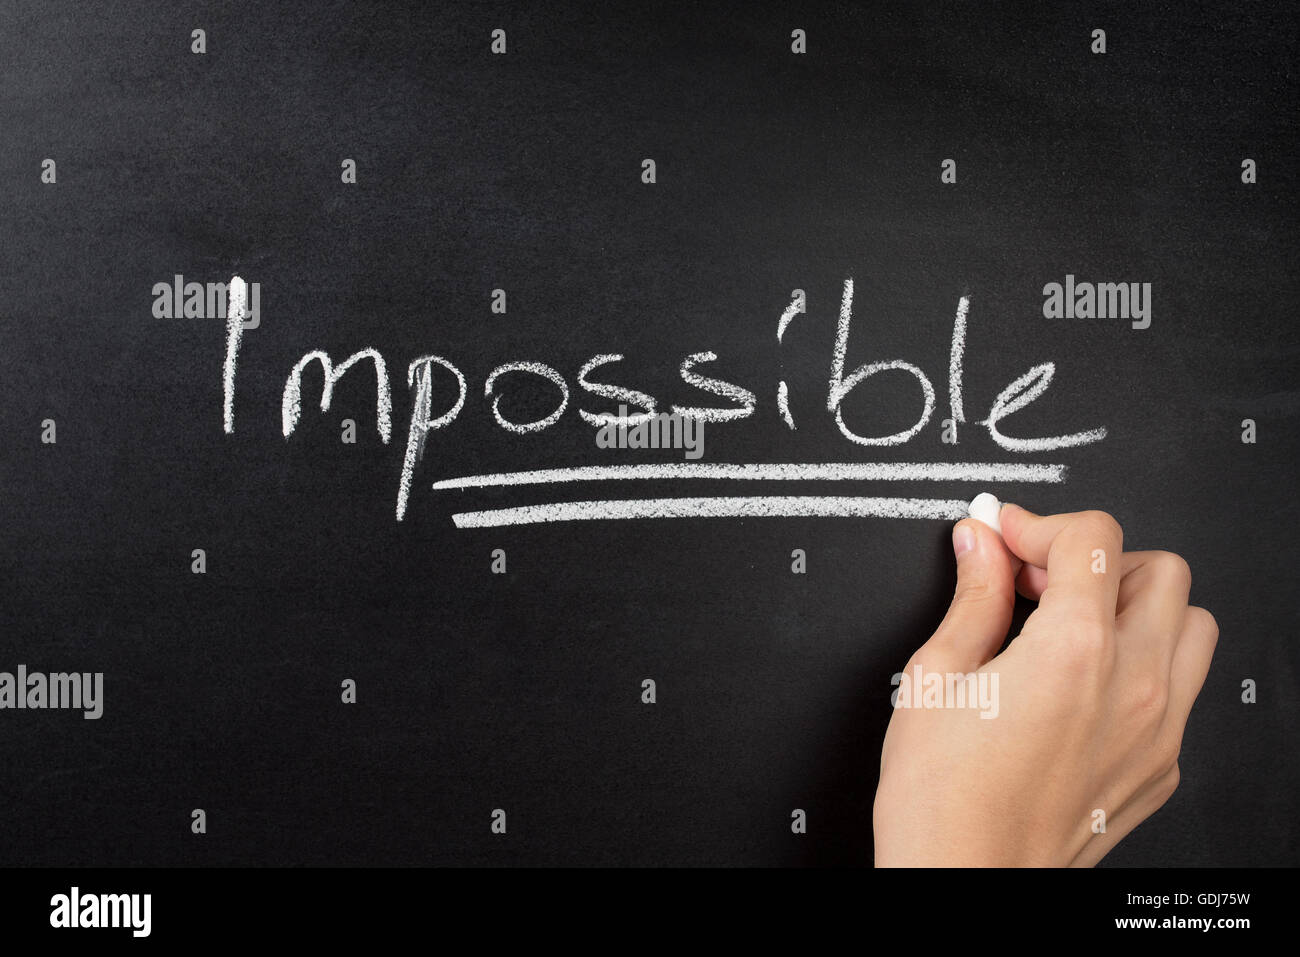 impossible text on blackboard Stock Photo